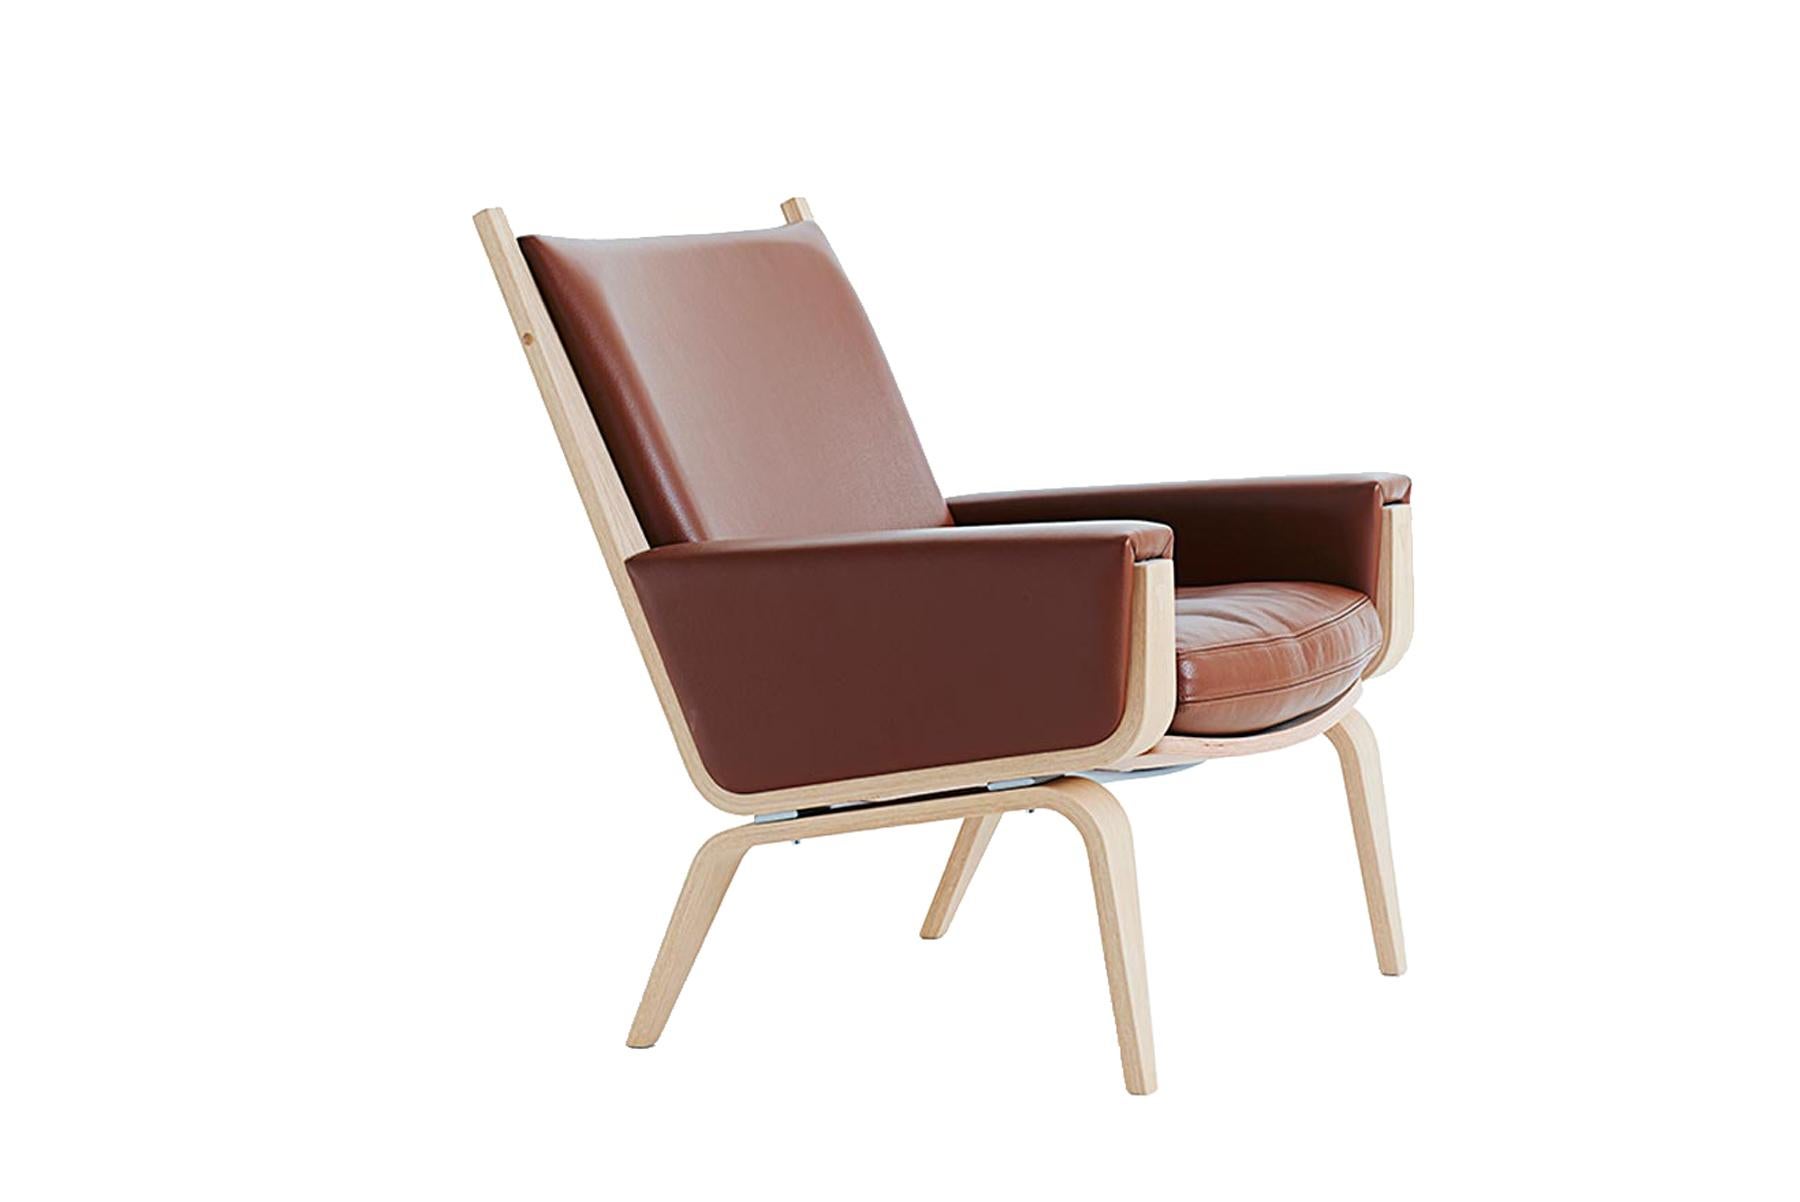 Designed in 1967 by Hans Wegner, the 501A highback lounge chair blends timeless elegance and comfort. Crafted in laminated, bent oak and hand built at GETAMA’s factory in Gedsted, Denmark by skilled cabinetmakers using traditional Scandinavian